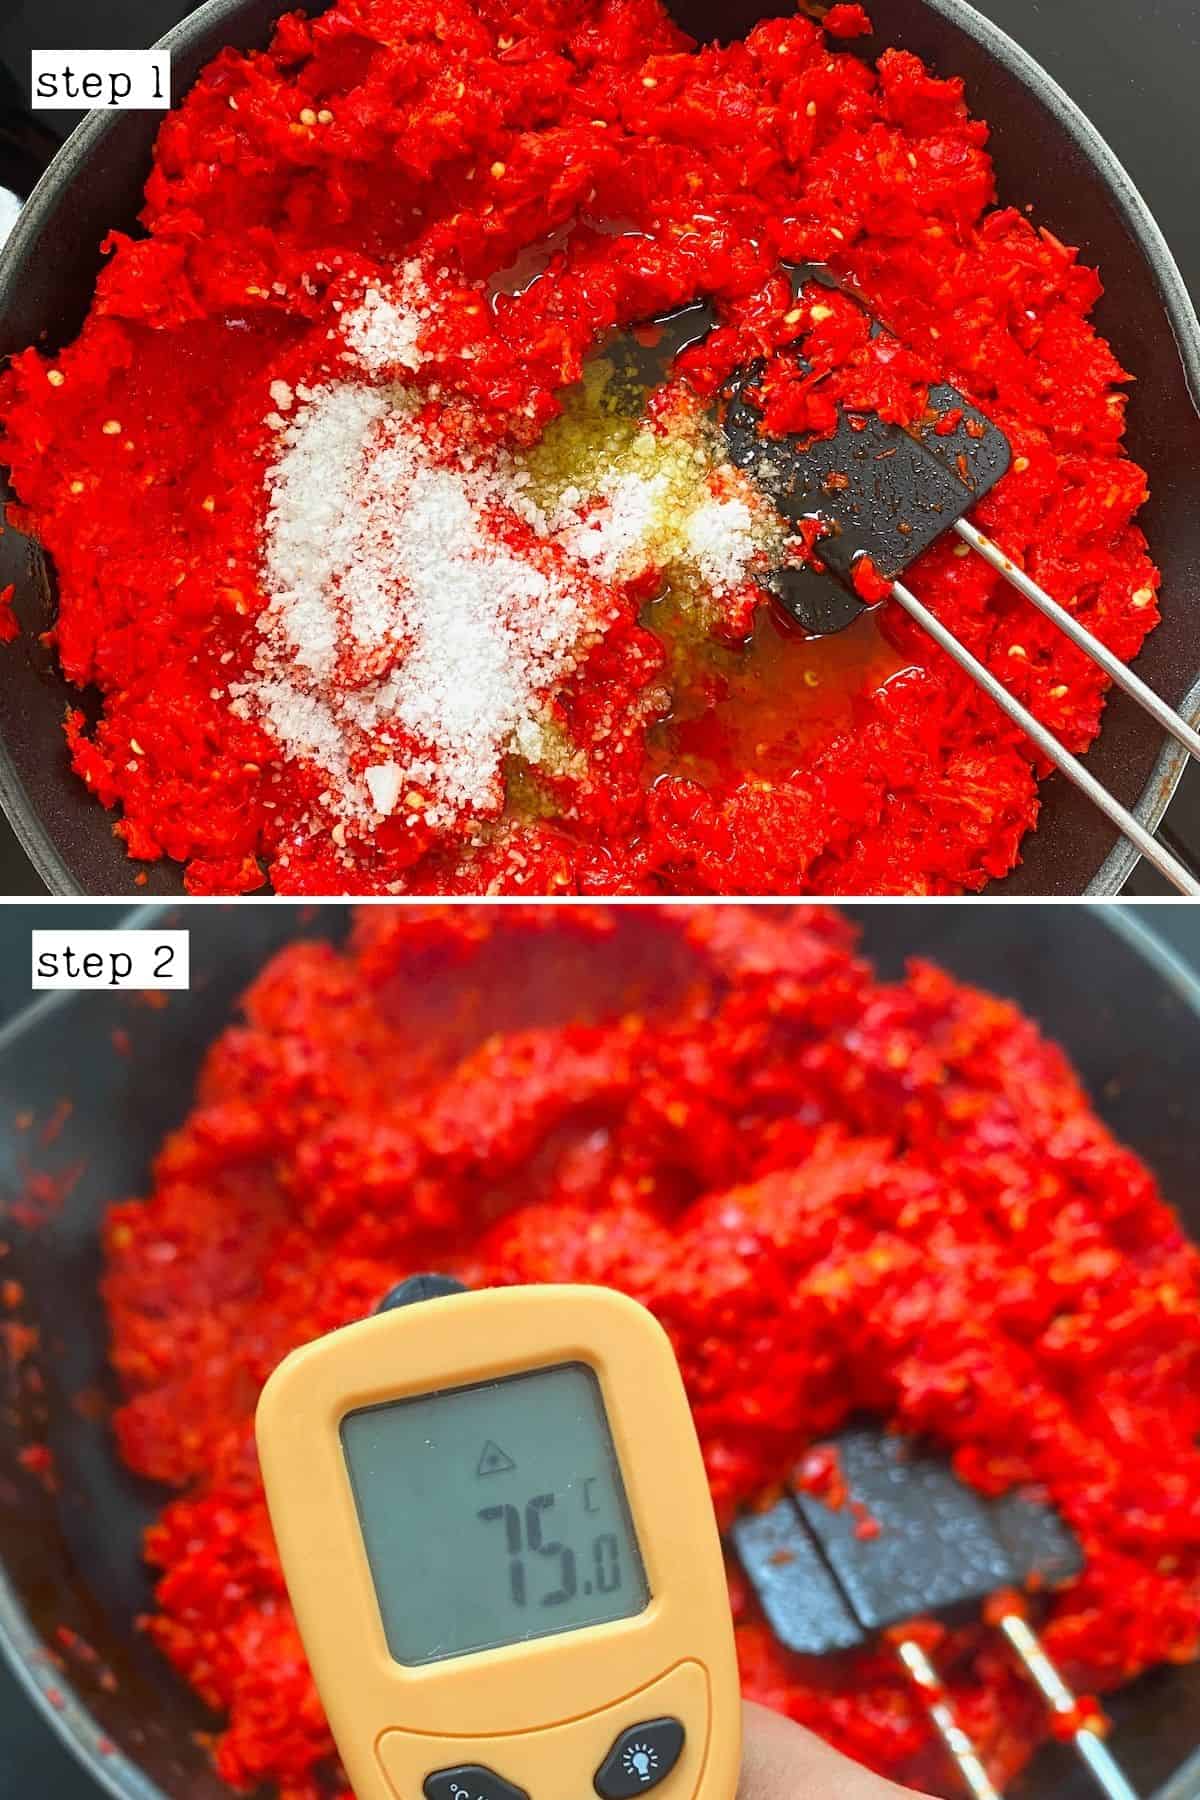 Steps for preparing chili paste for canning